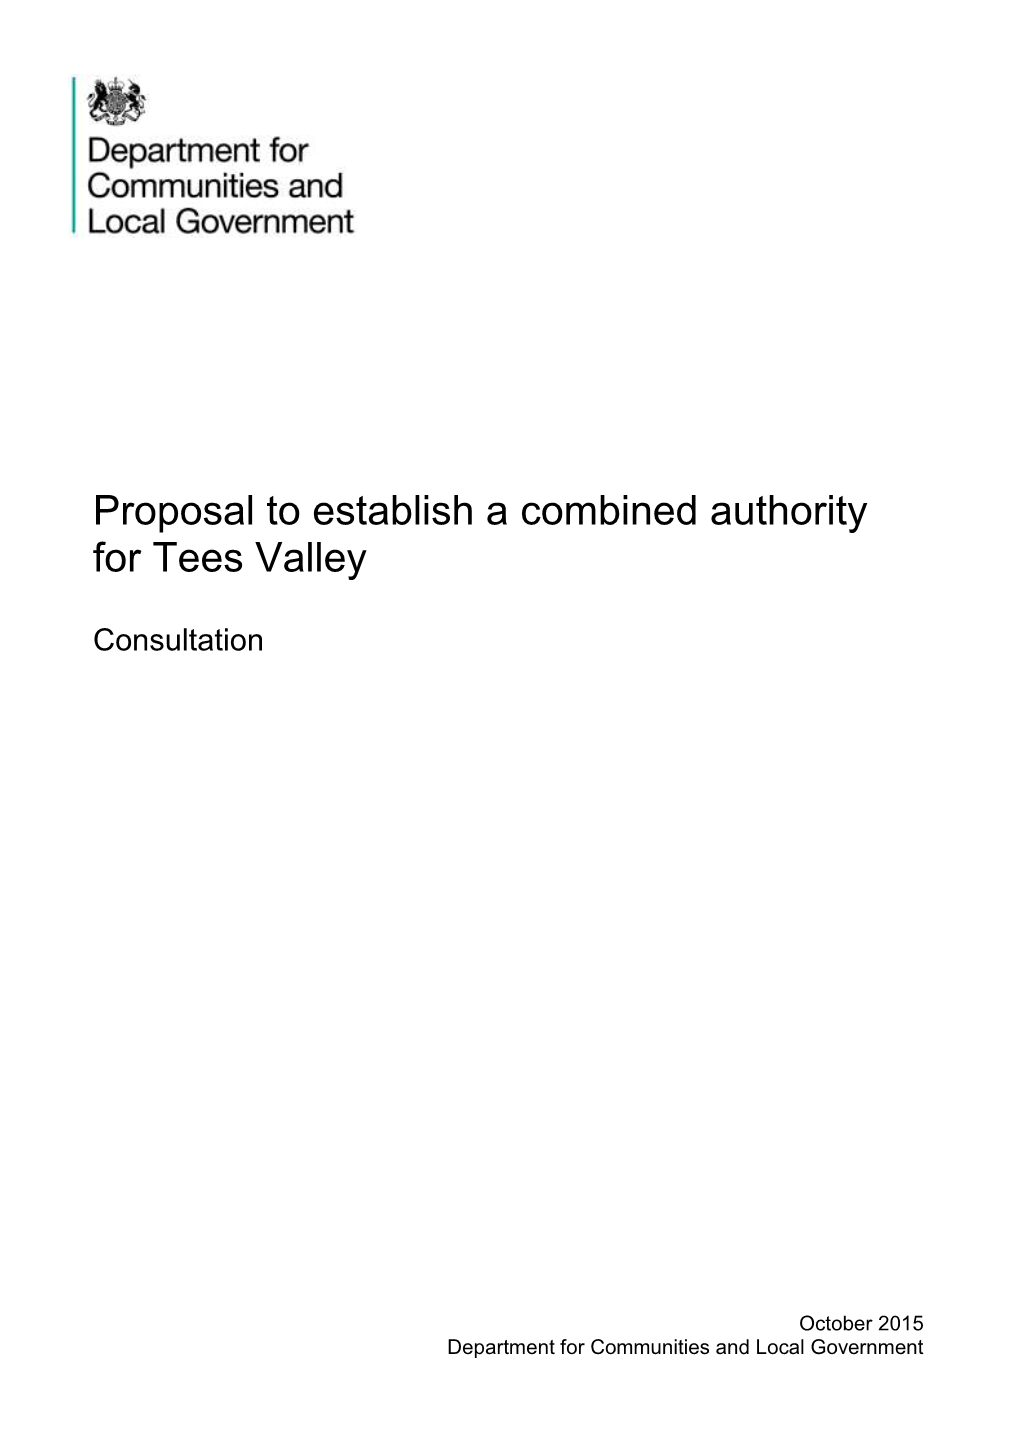 Proposal to Establish a Combined Authority for Tees Valley